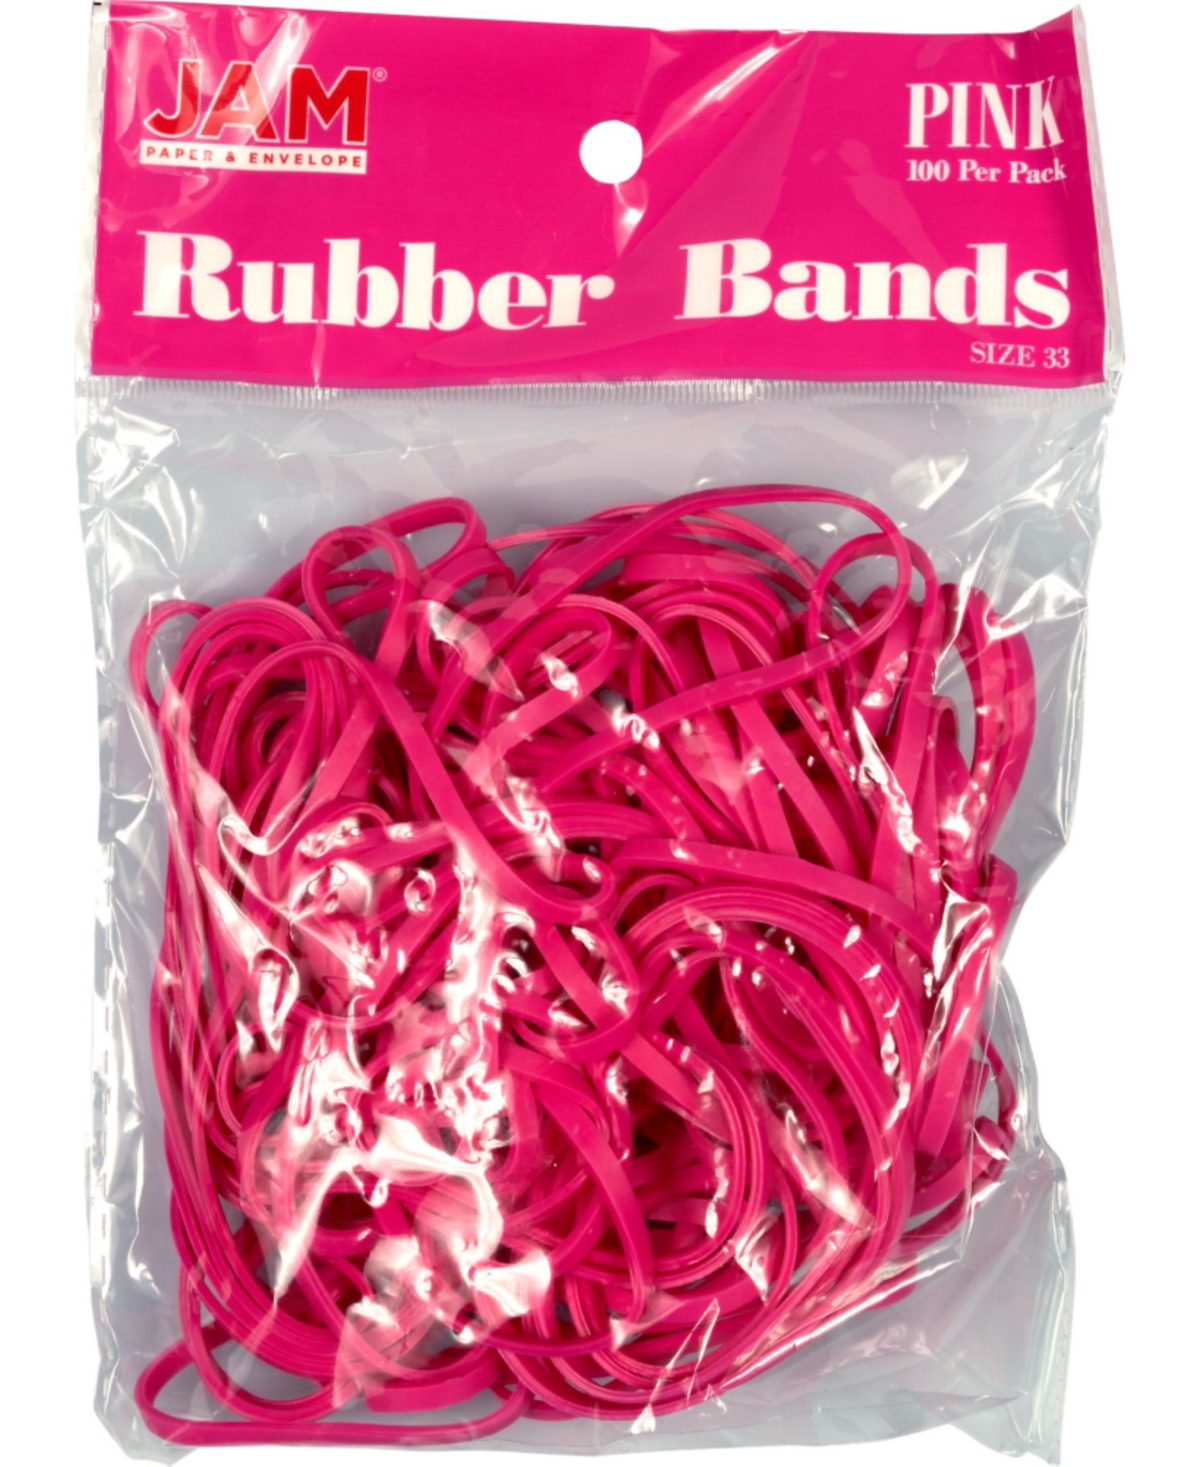 UPC 707152624800 product image for Jam Paper Colorful Rubber Bands - Size 33 - 100 Per Pack | upcitemdb.com